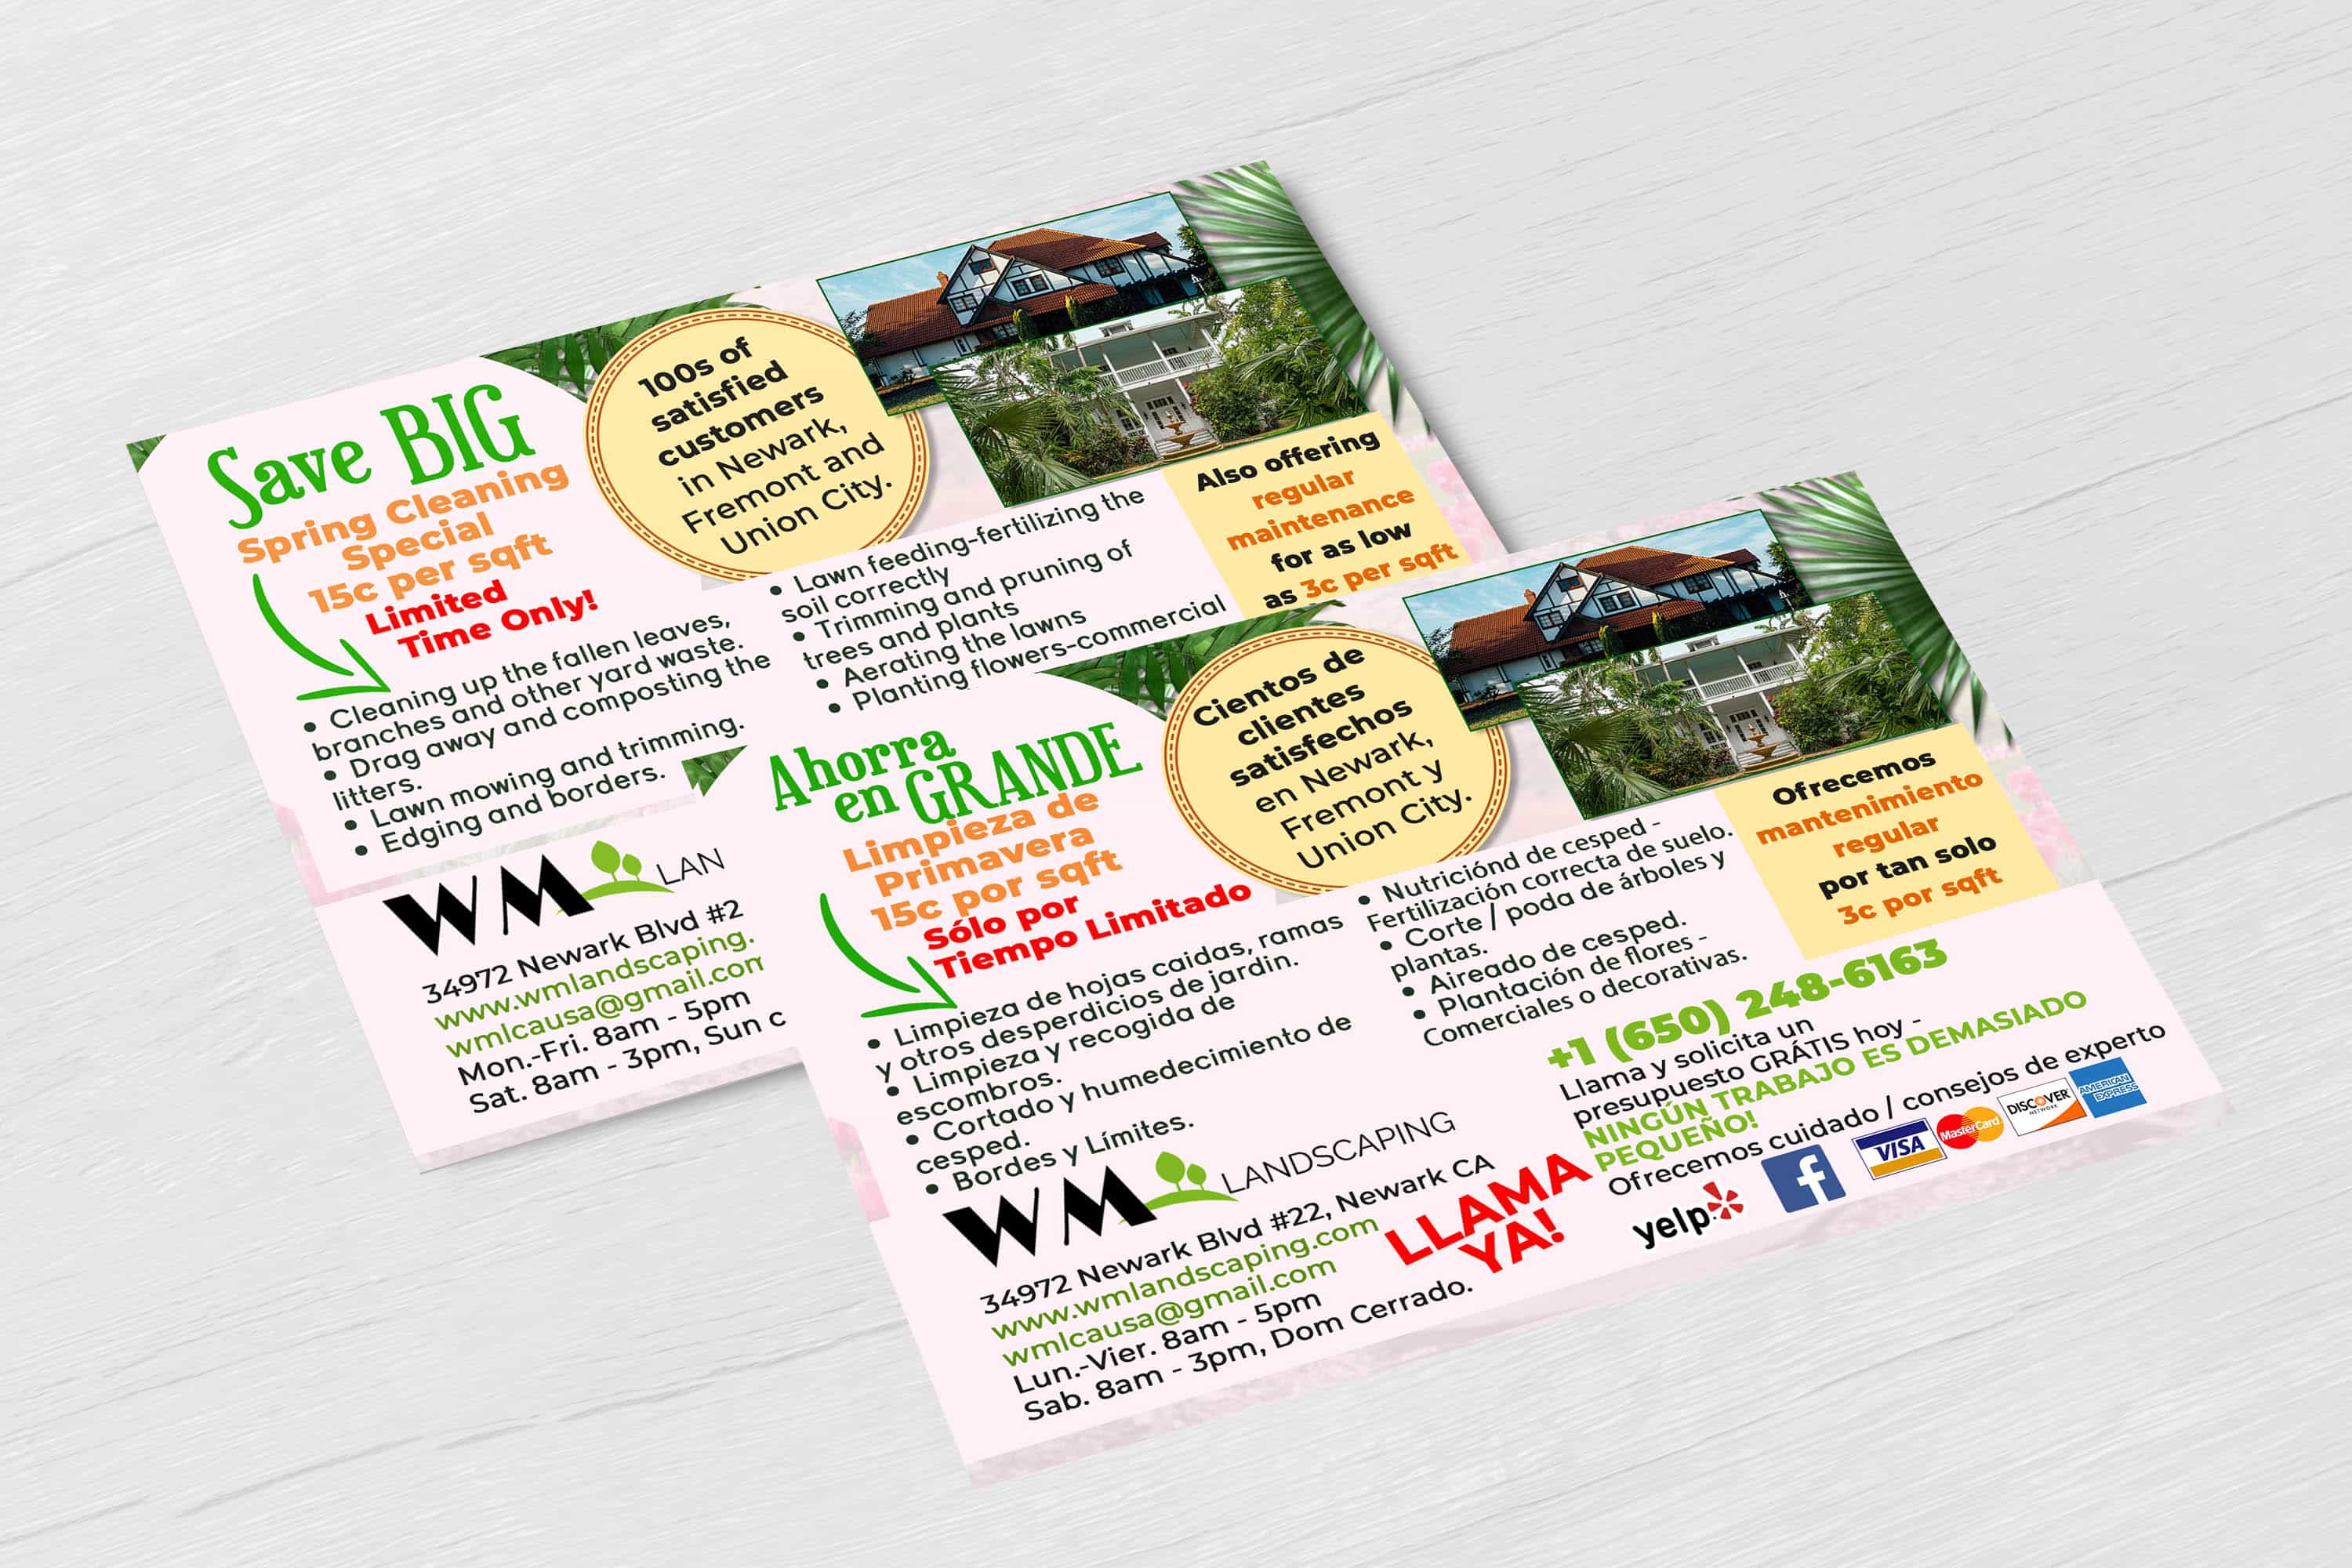 Spring Cleaning Postcards for WM Landscaping